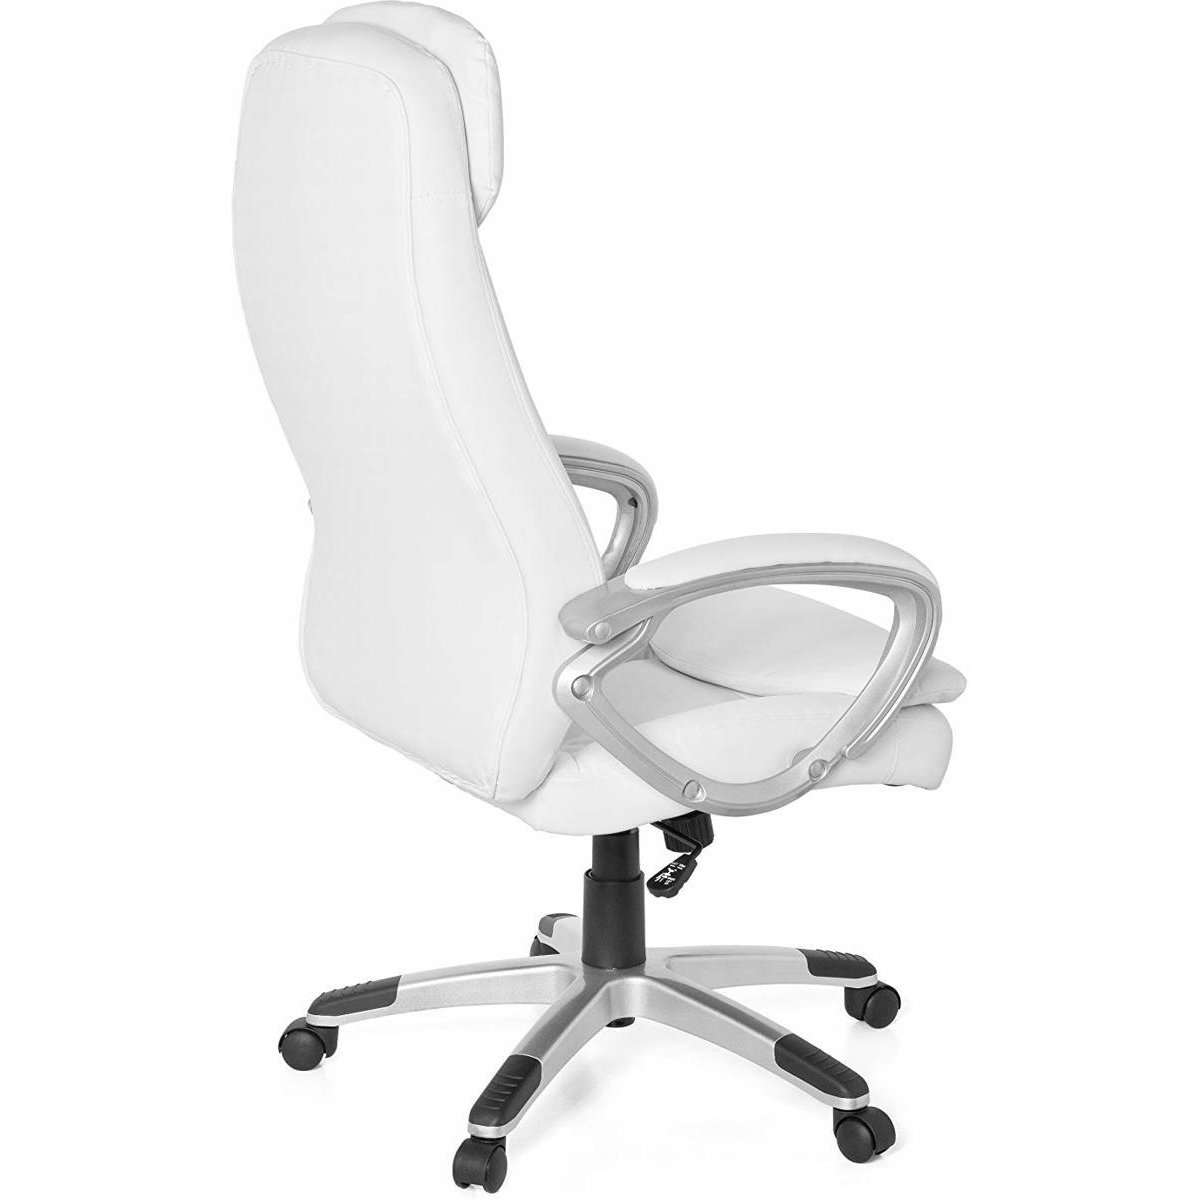 Nancy's Van Nest Office Chair - Executive Chair - Ergonomic Swivel Chair - Office Chairs For Adults